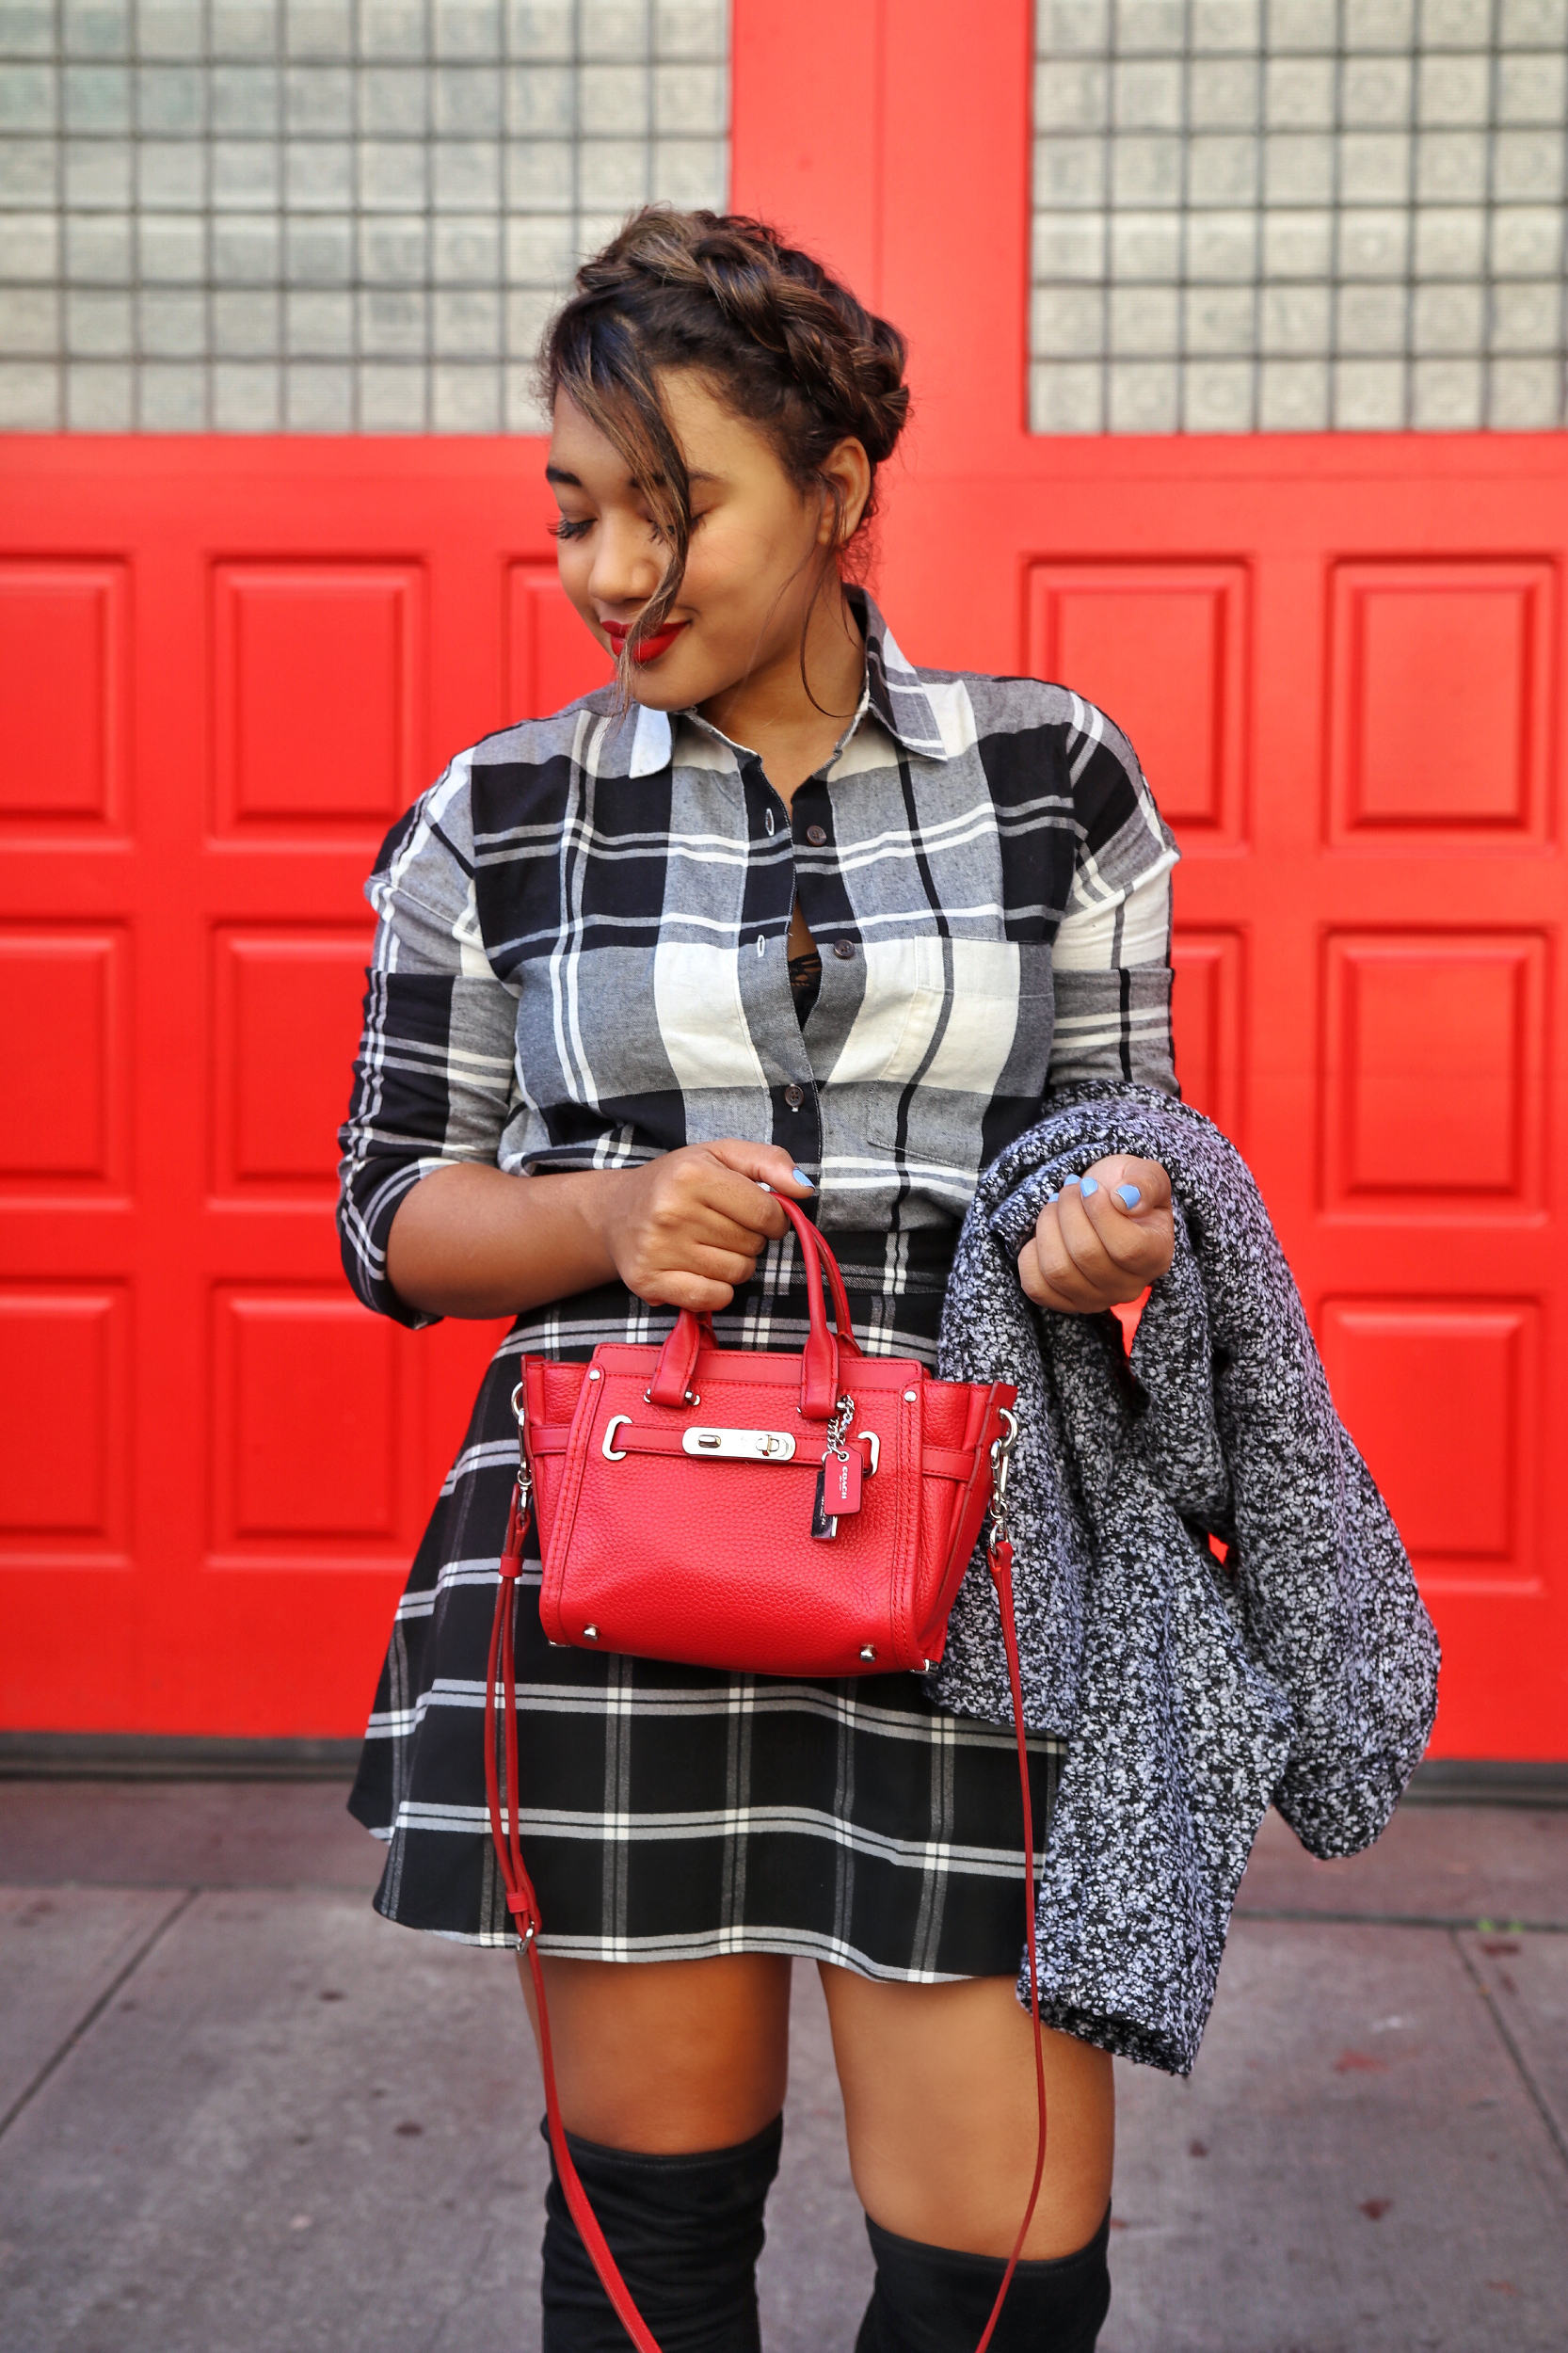 Mad about Plaid ! Fall stying by Color Me Courtney (@colormecourtney) // How to wear plaid for fall #plaid #overthekneeboots #otkboot #patternmixing #blackandwhite